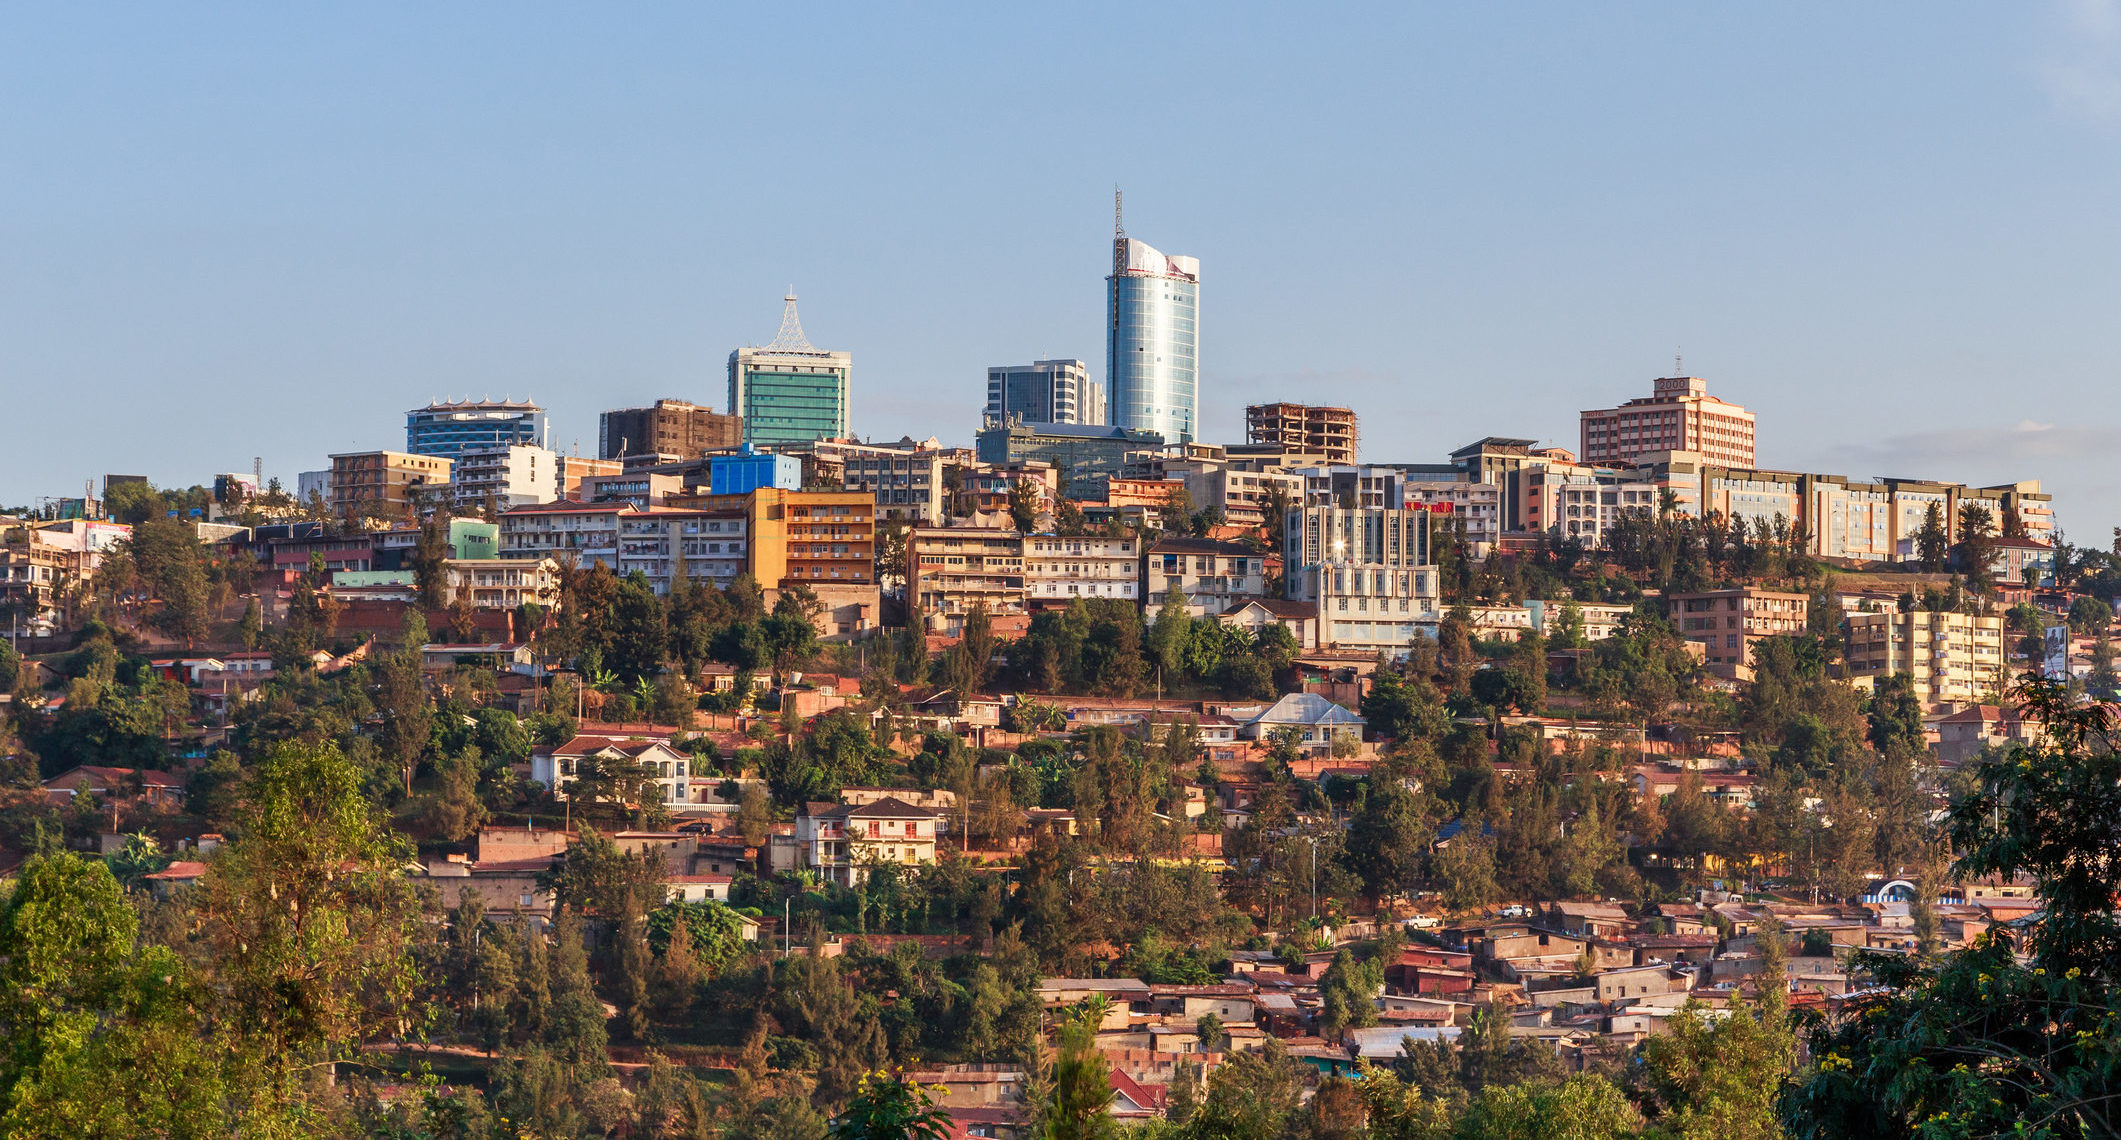 Experience vibrant Rwandan cityscape like this tree-lined architecture in Kigali when you take a tailor-made holiday with Alfred&.